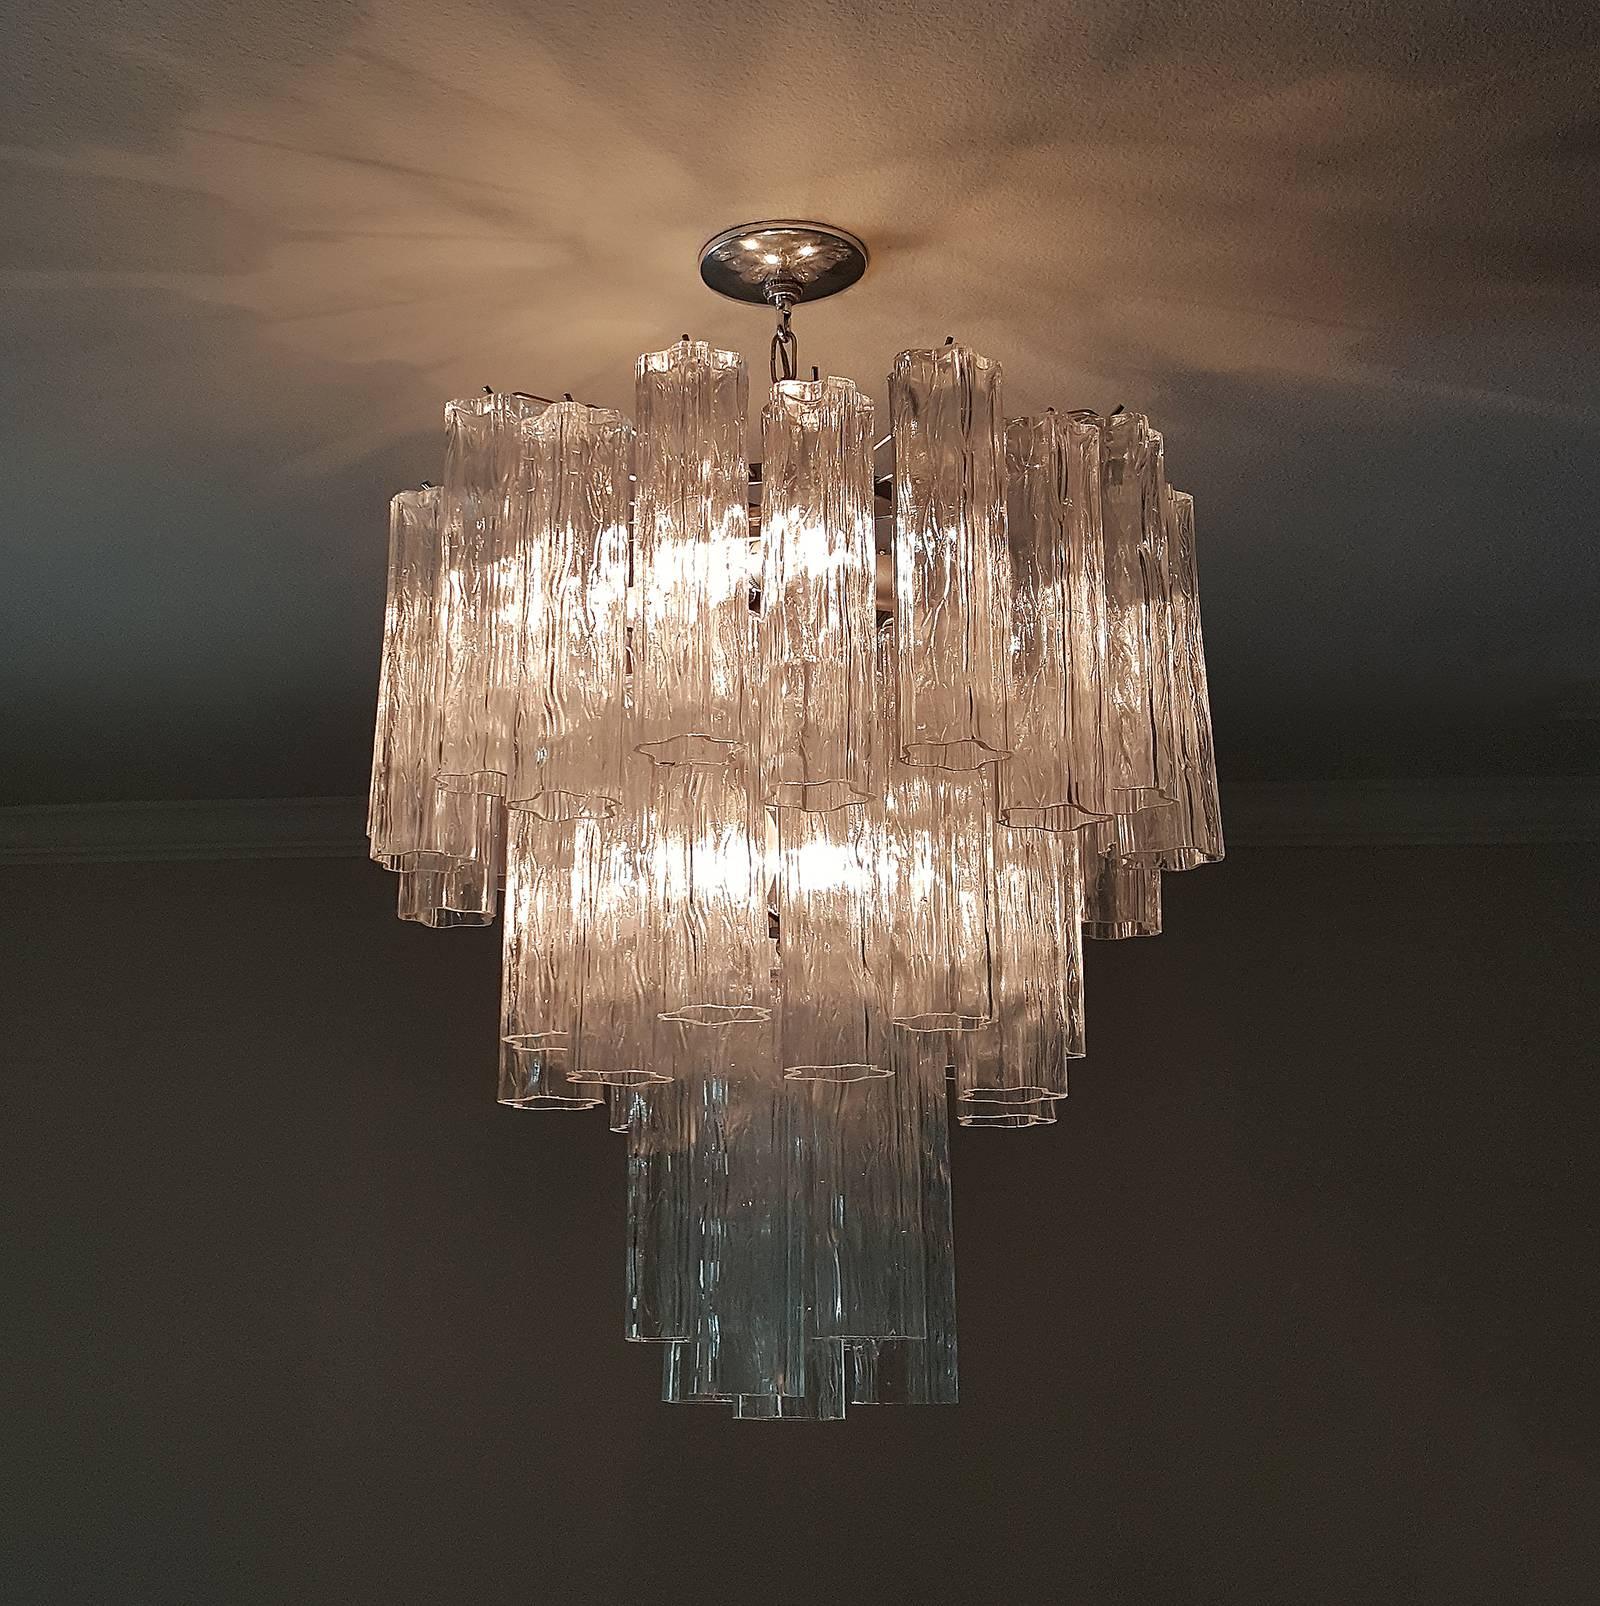 This elegant Italian Murano glass chandelier is comprised of three-tiers of handblown glass elements that resemble the shape of snowflakes. The nickel finished fixture is in very good condition and all of the glass elements appear to be in excellent